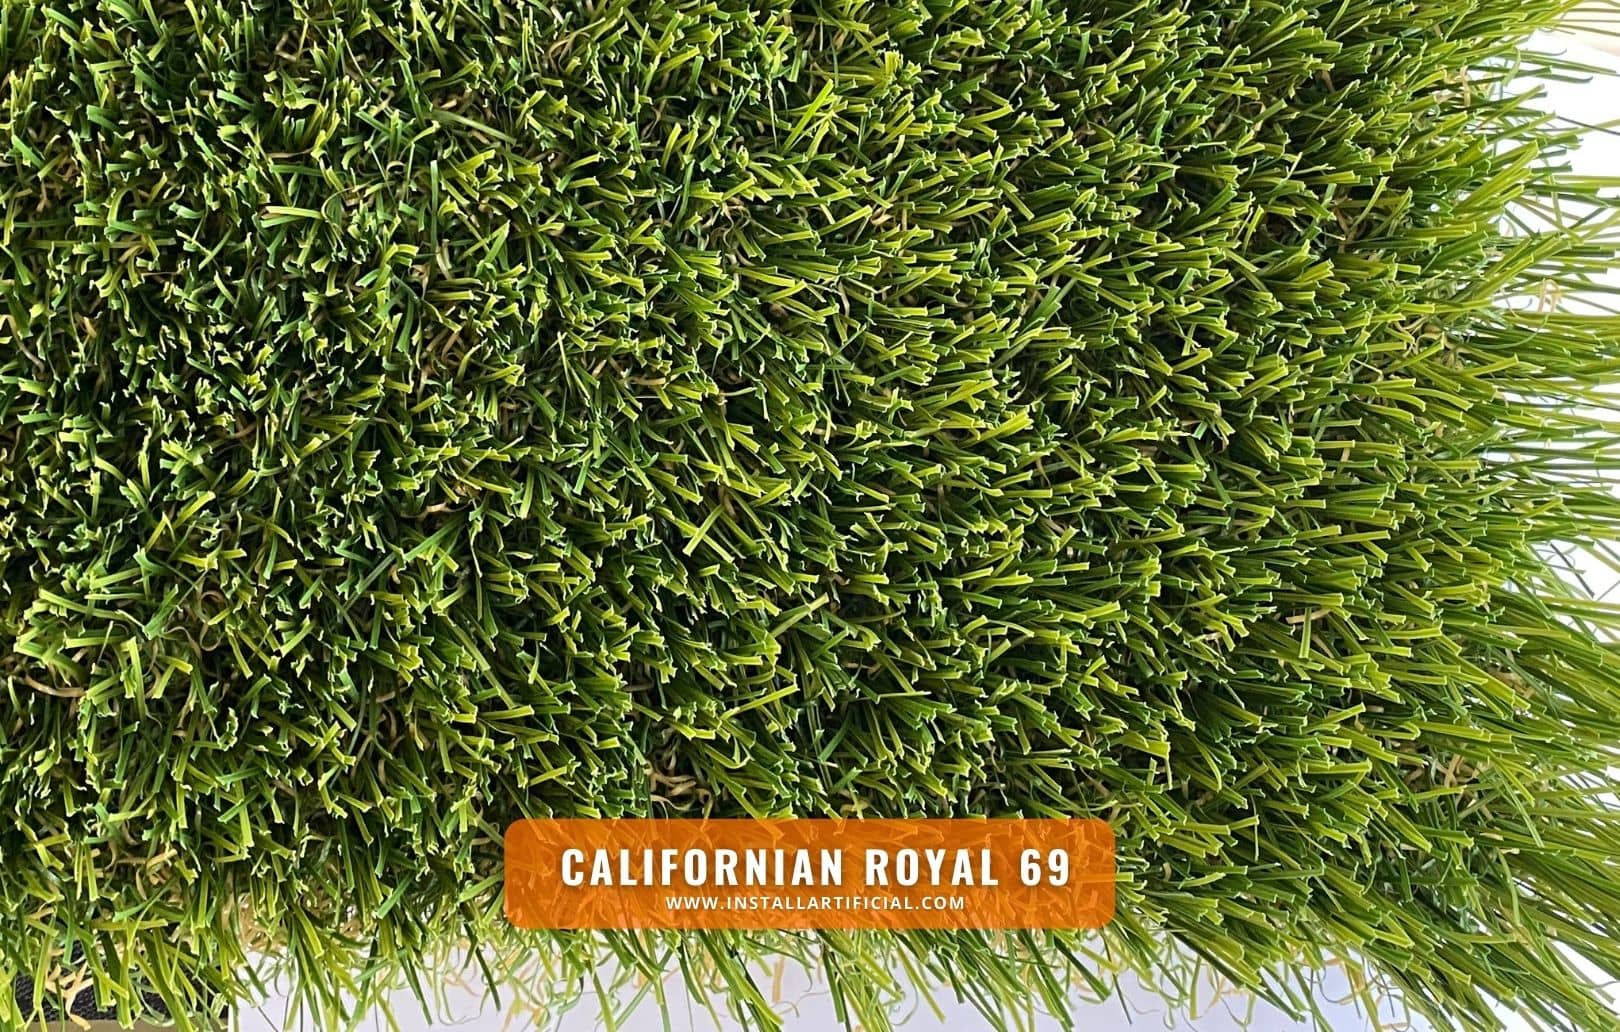 Californian Royal 69, Imperial Synthetic Turf, top